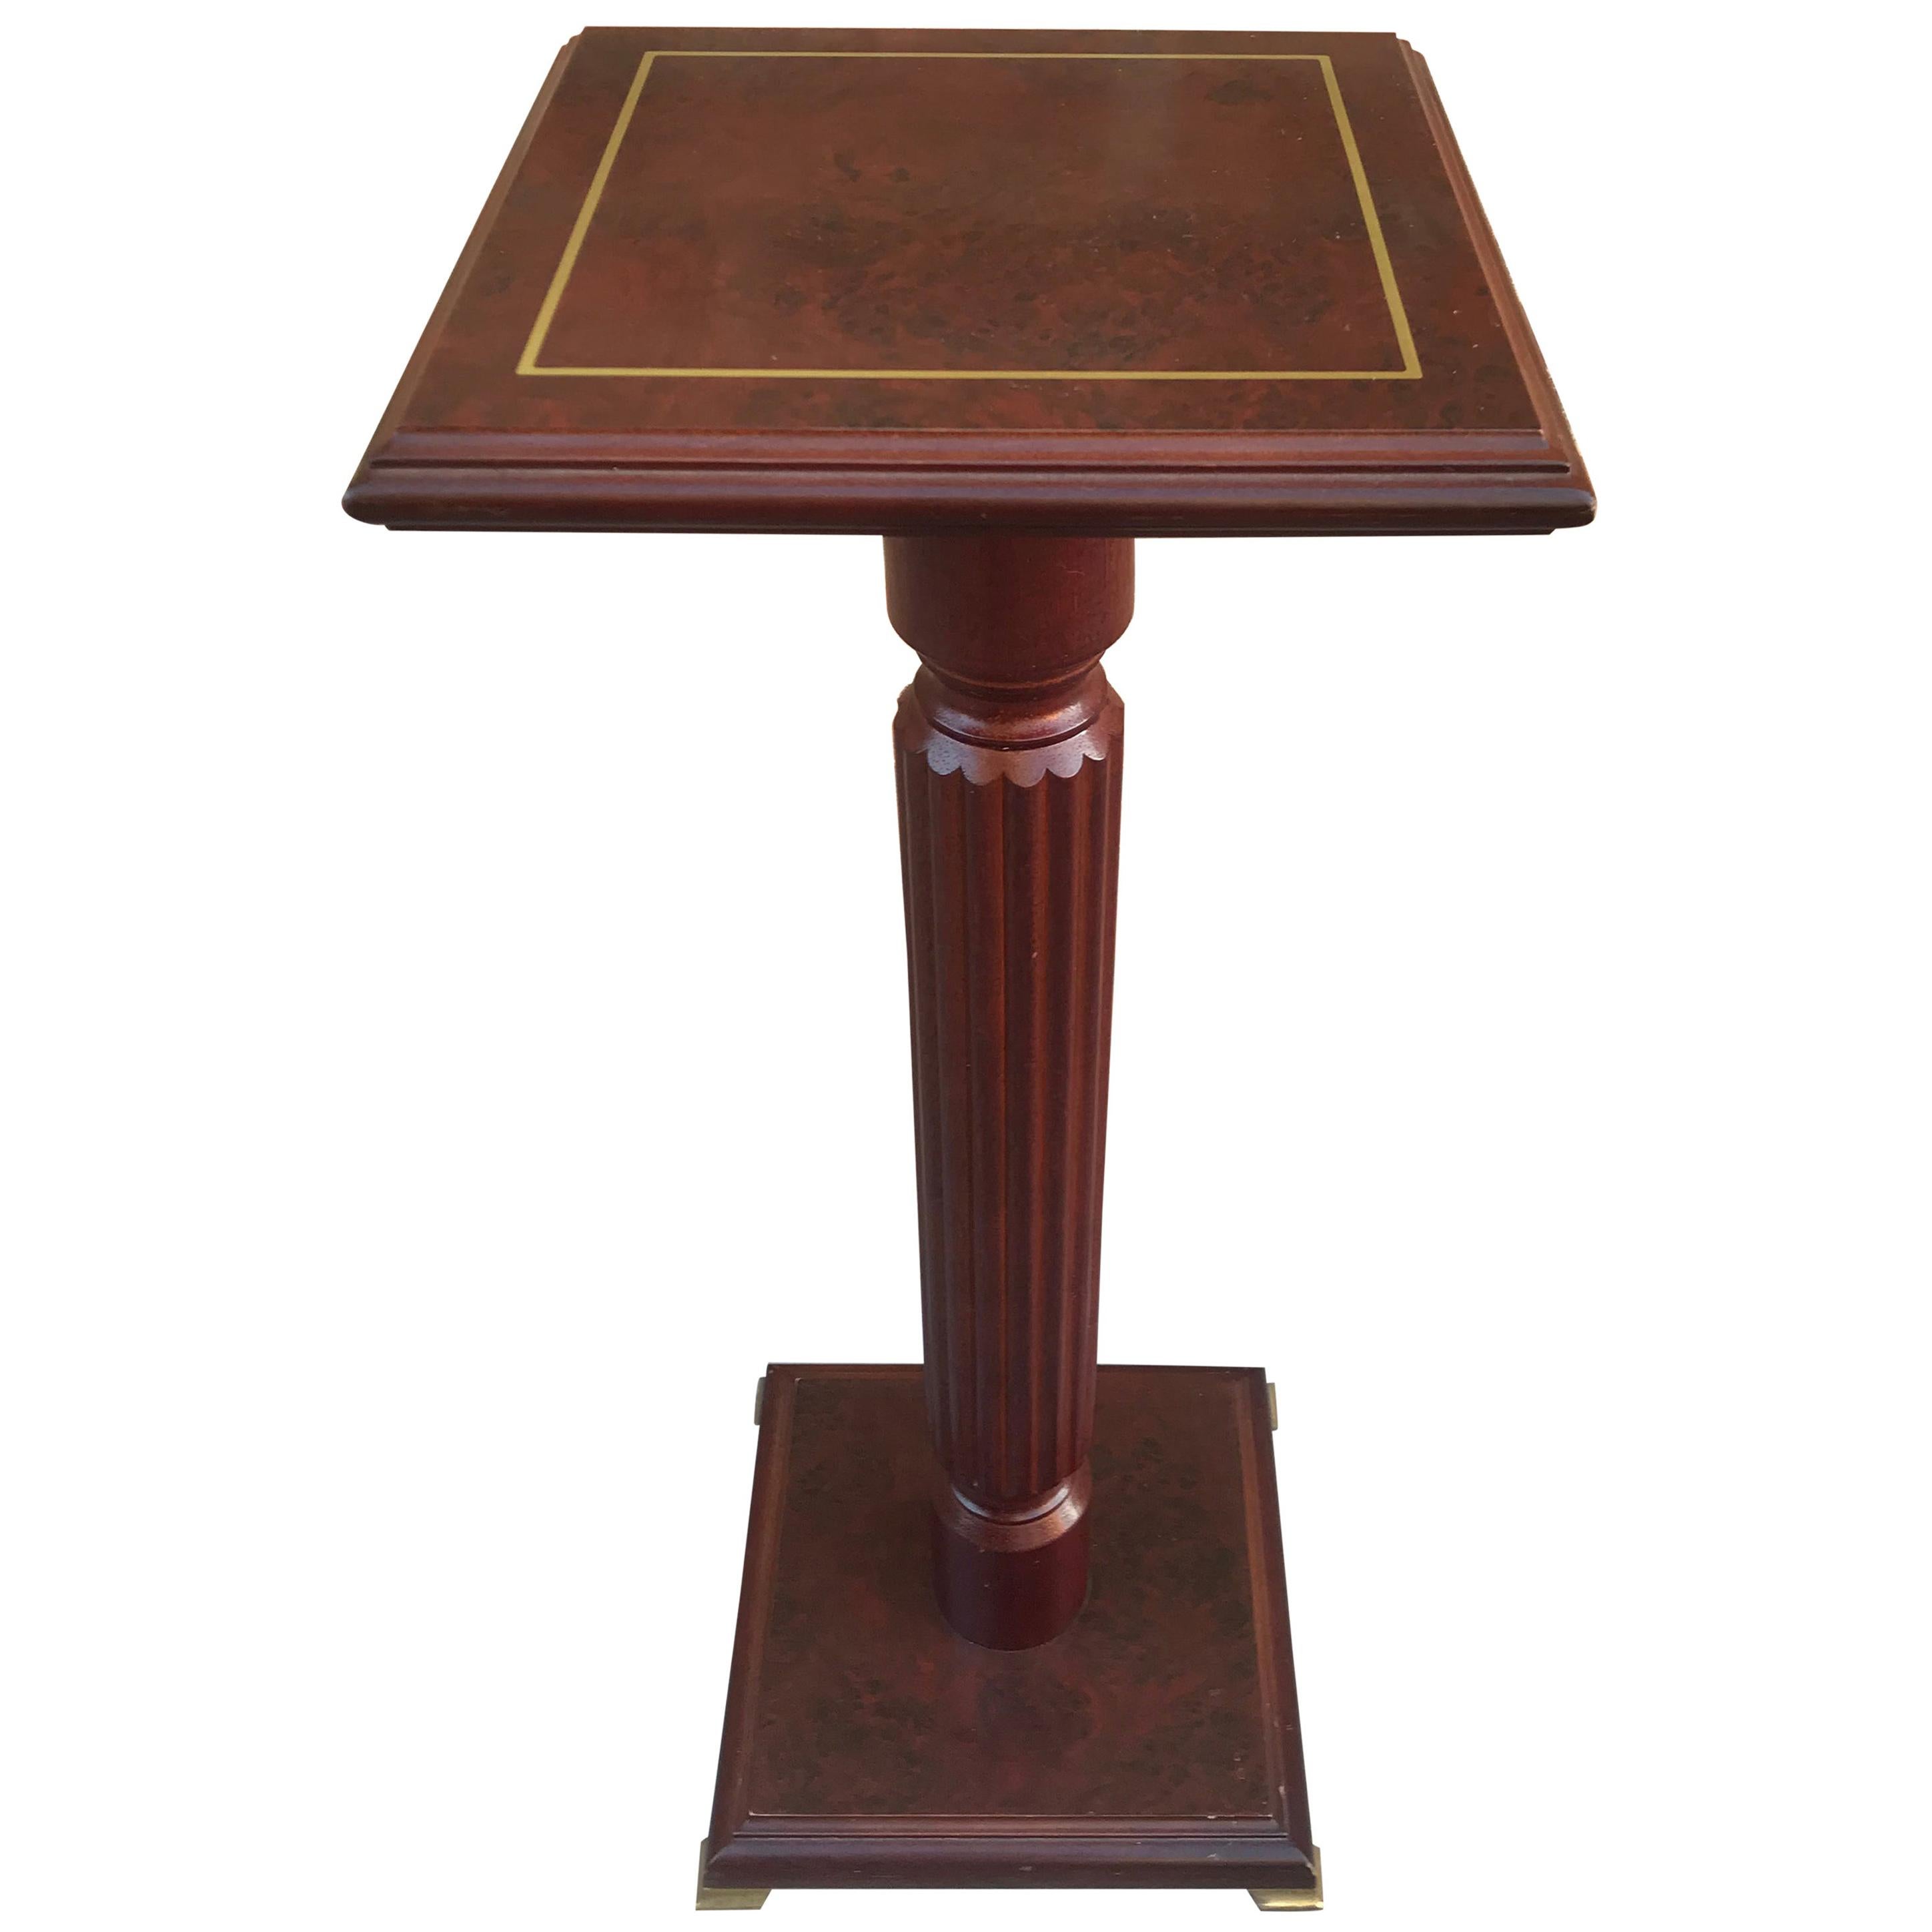 Mid-20th Century Mahogany Wood Square Top Pedestal Table For Sale